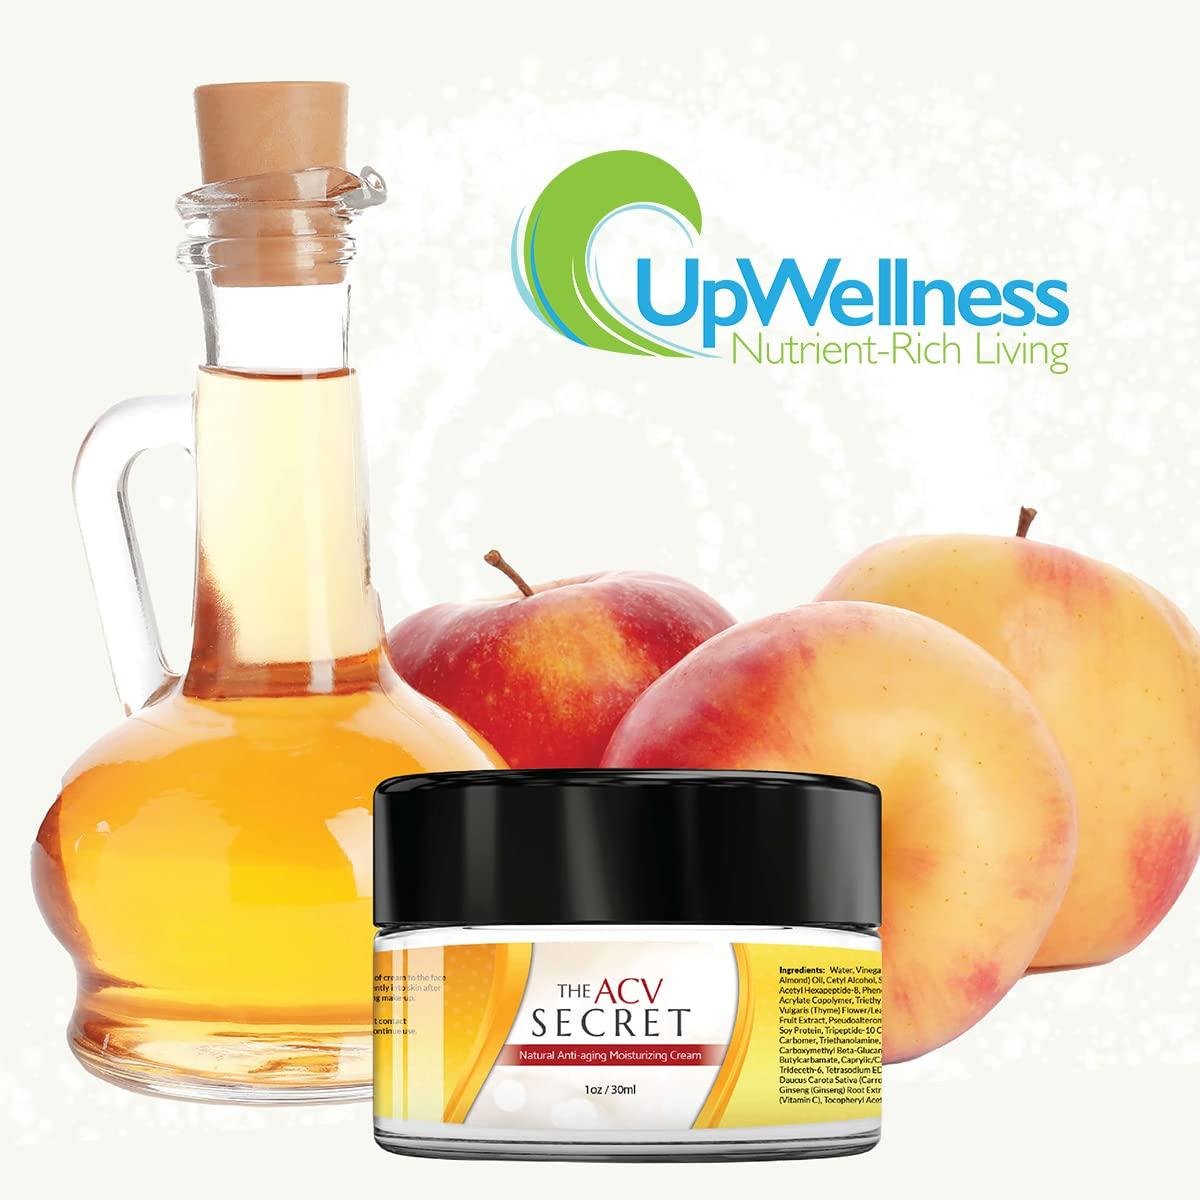 UpWellness: The ACV Secret Moisturizer - Skin Care with Apple Cider Vinegar  - 30 ml - 7 Natural Anti-Aging Ingredients - Supports Skin Detoxification  and Restoration - Physician Formulated